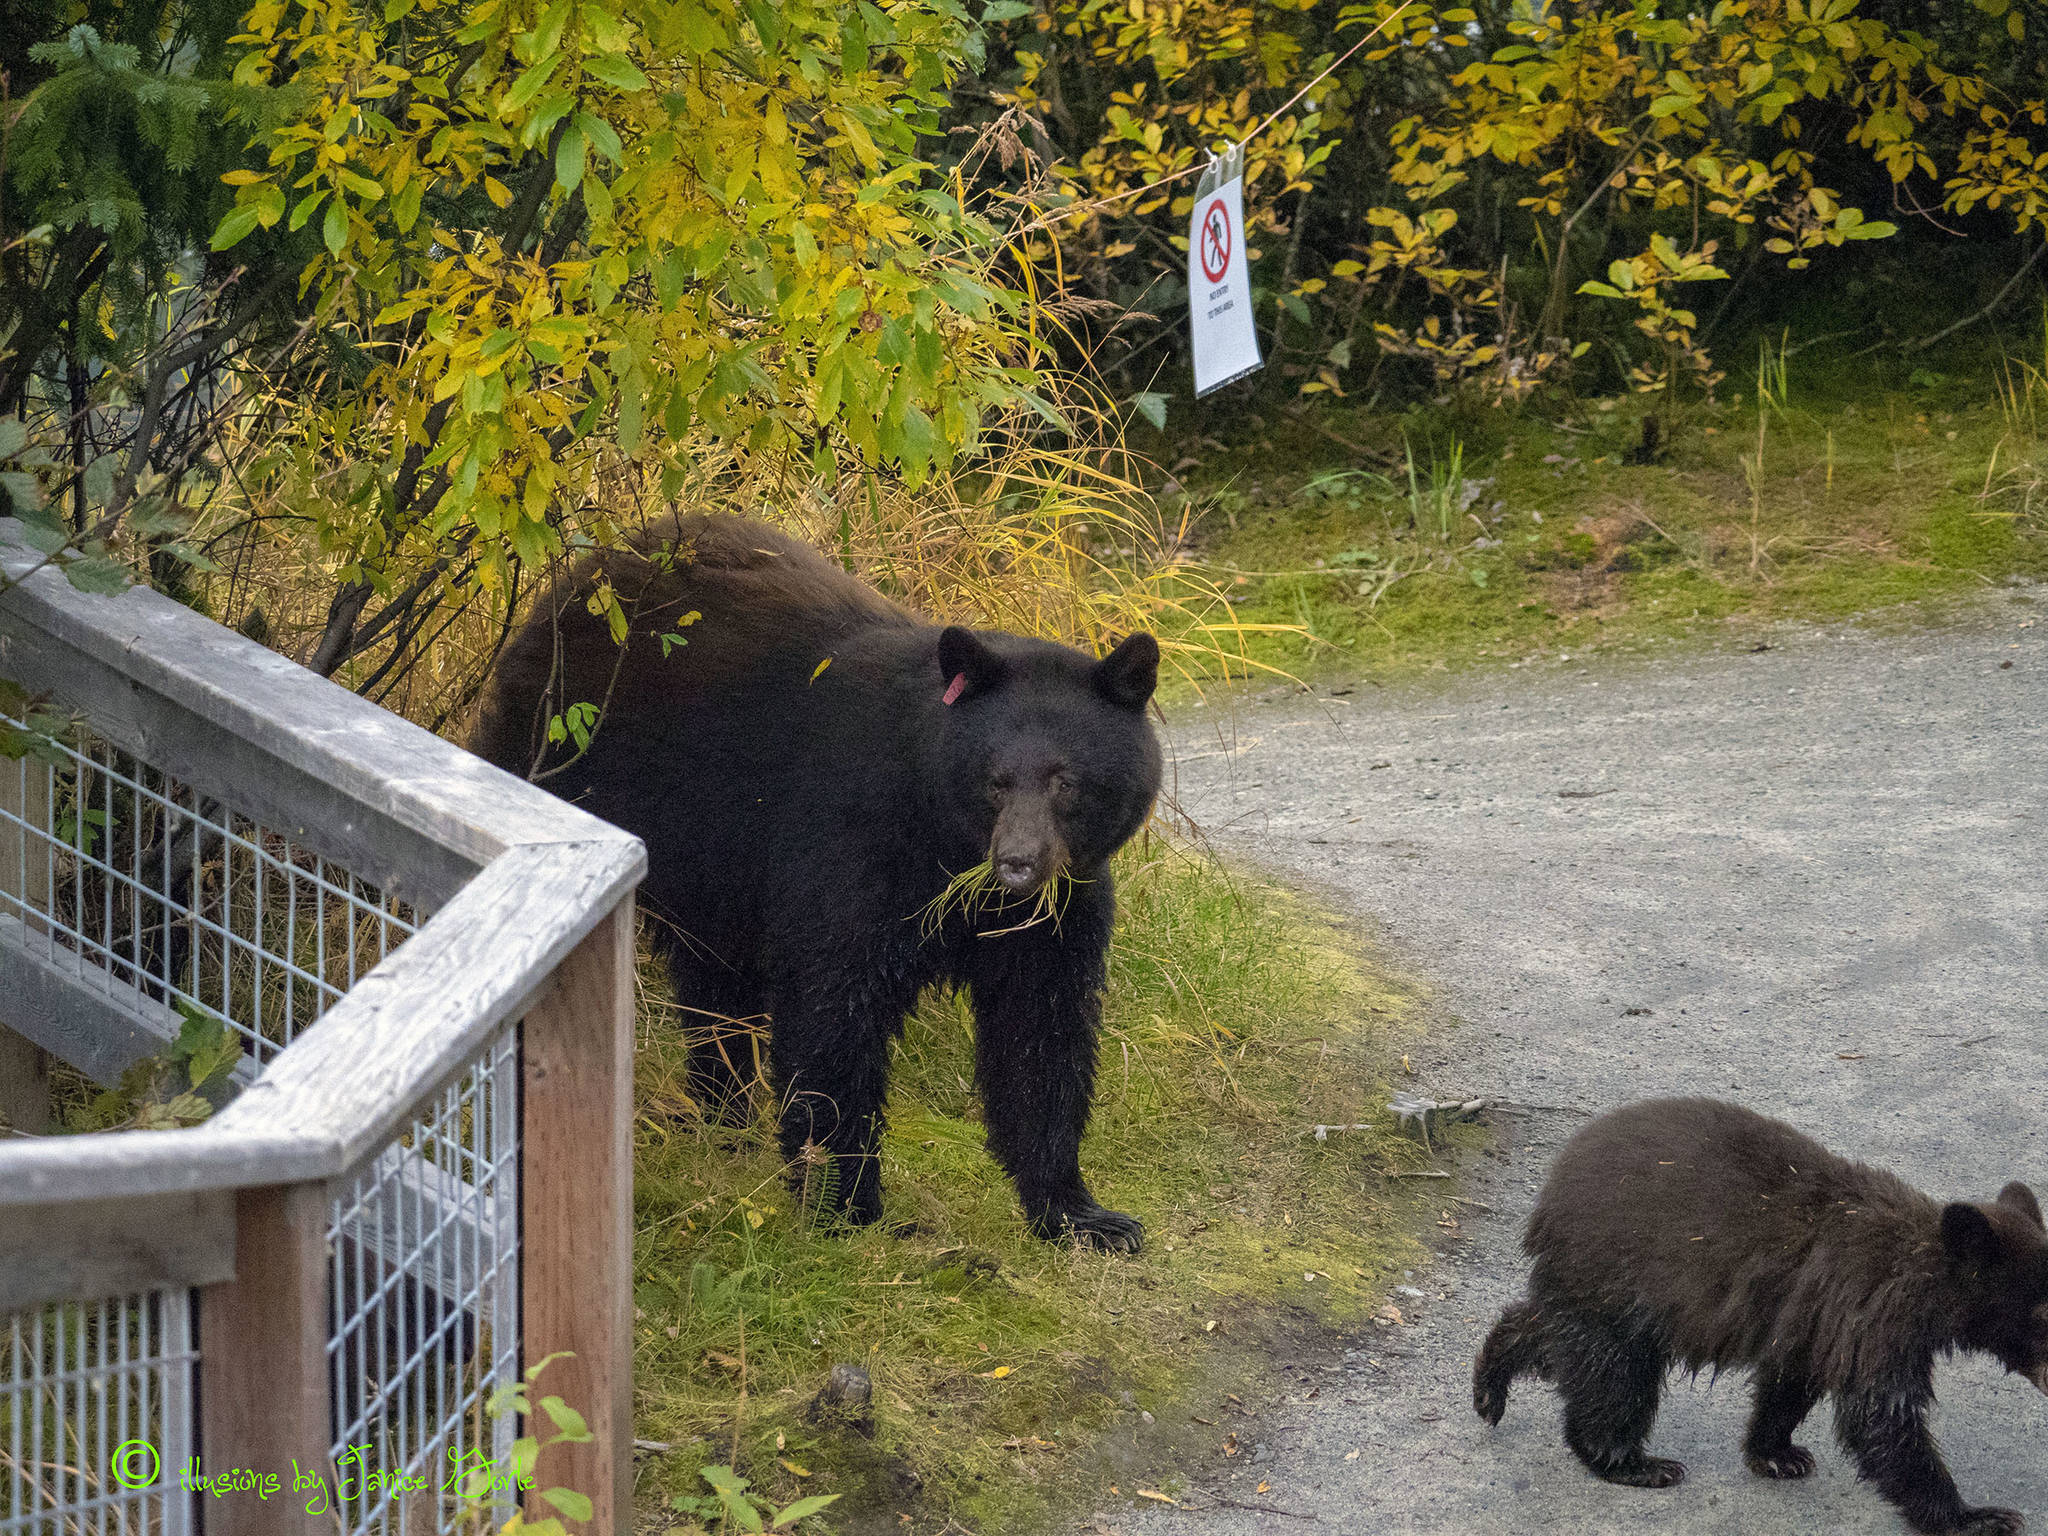 “Can’t find fish … I’ll eat some grass”: Black bears near the Mendenhall Glacier on Sept. 28, 2018. (Courtesy Photo | Janice Gorle)